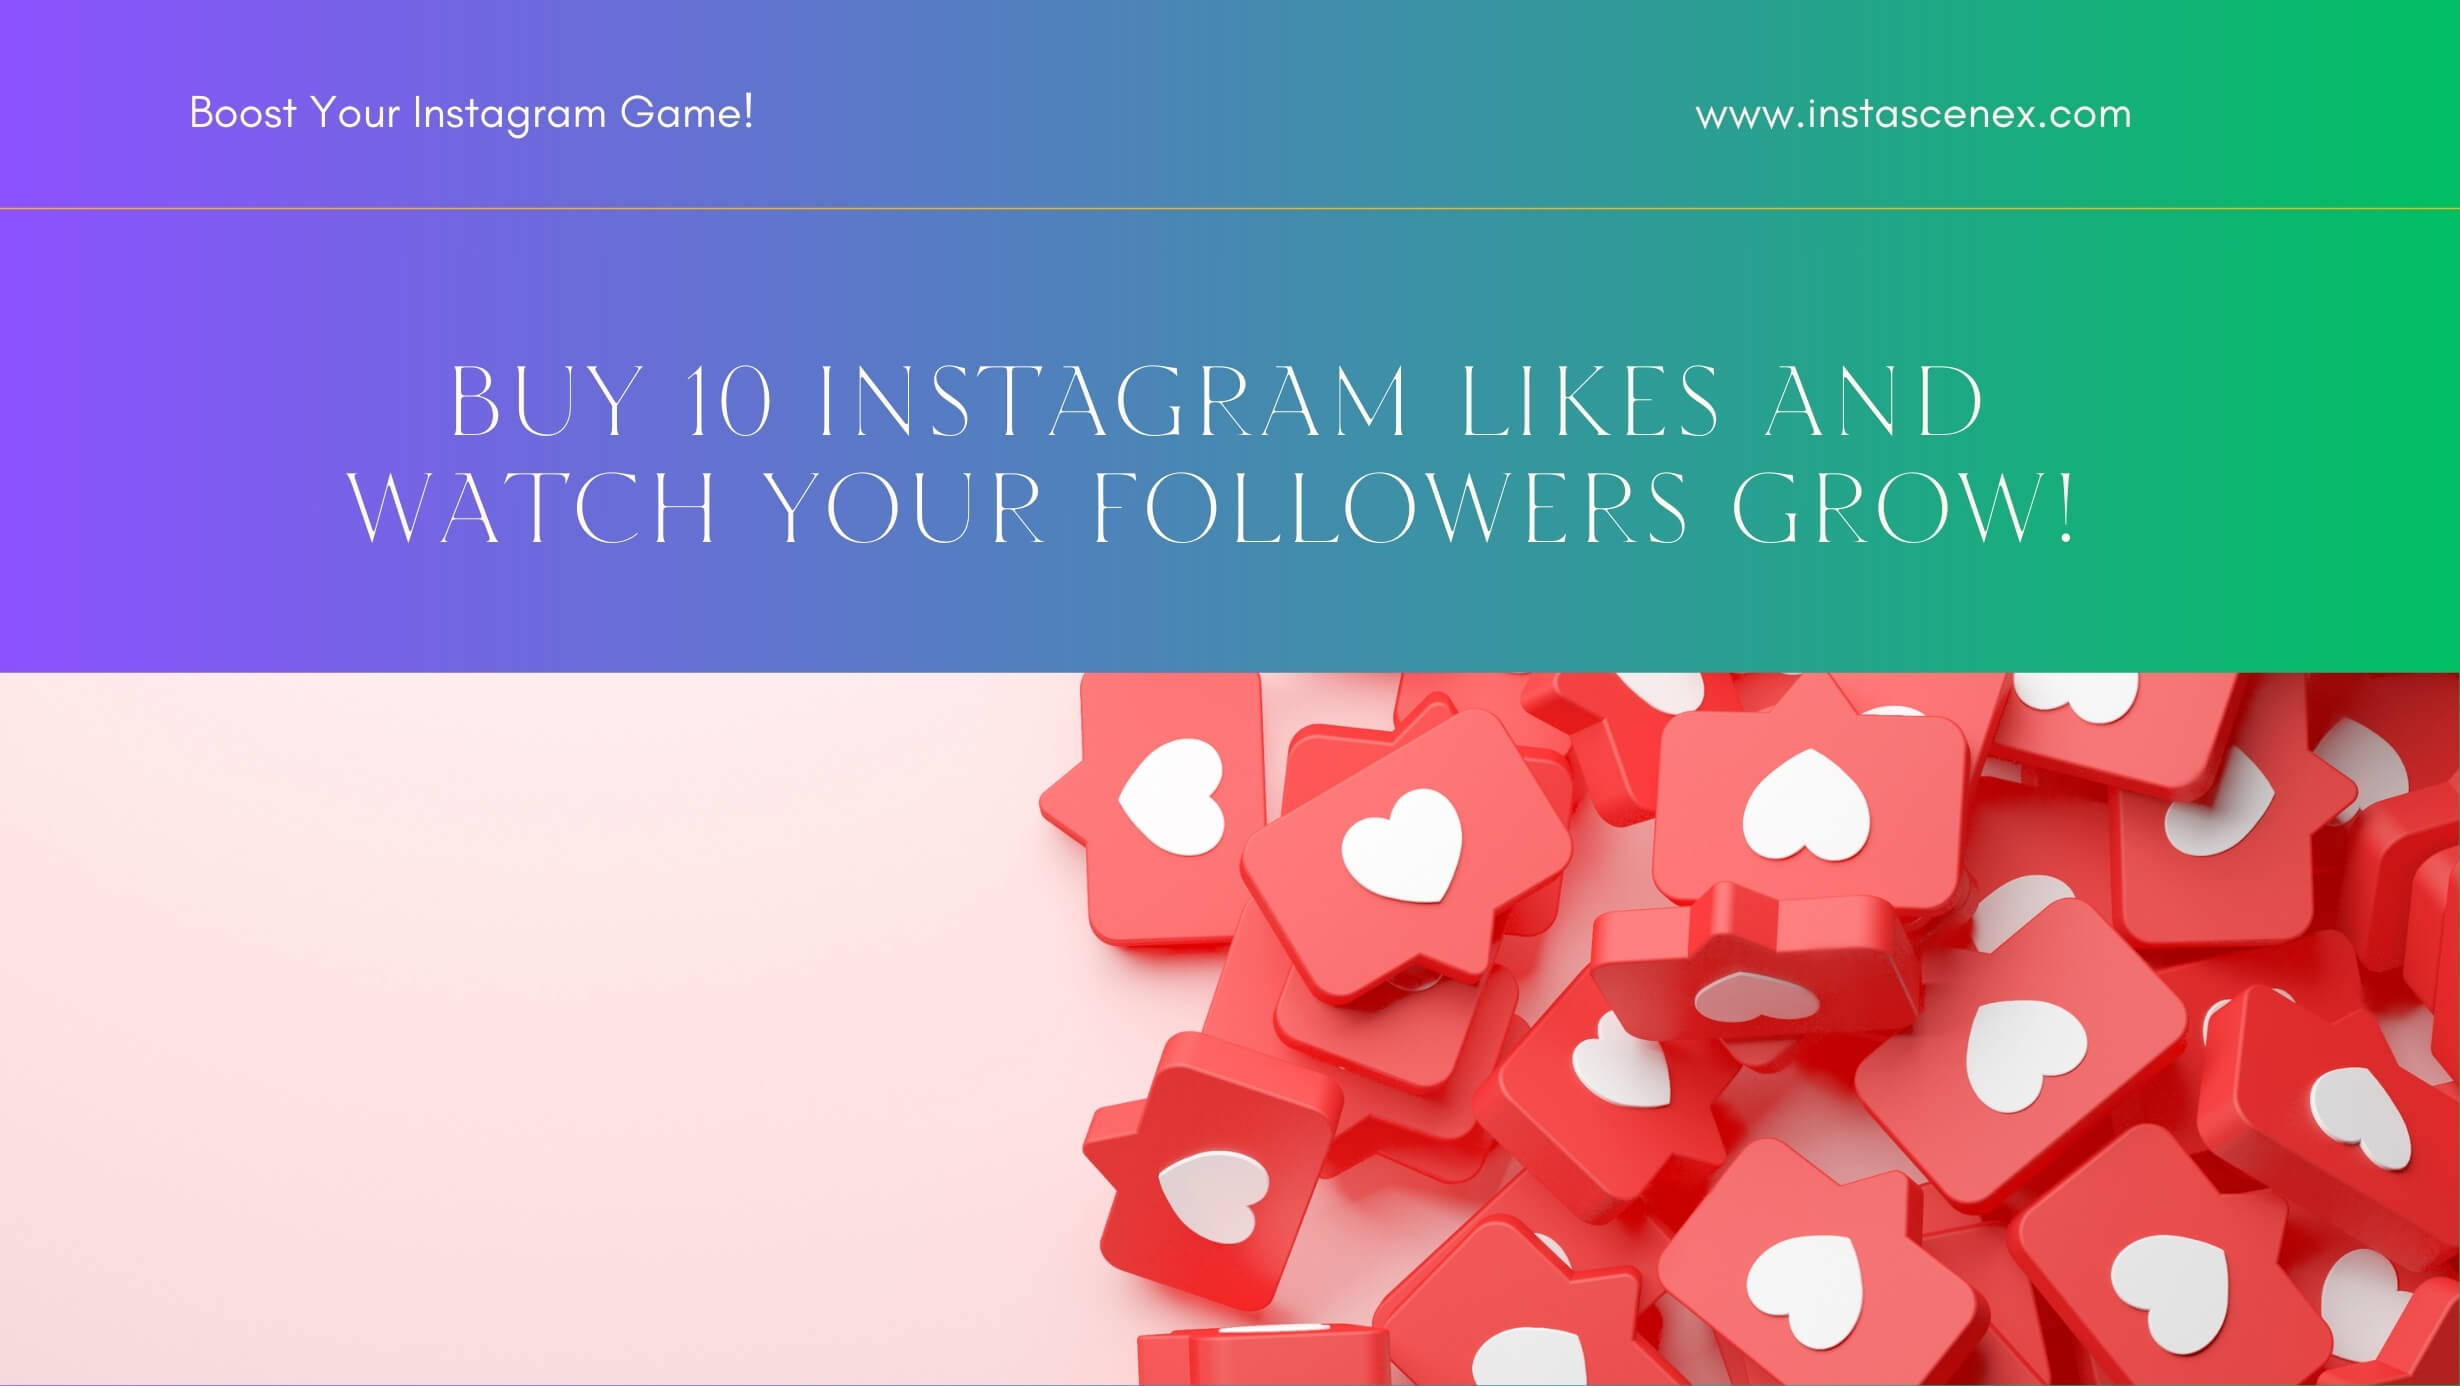 Buy 10 Instagram Likes and Watch Your Followers Grow!